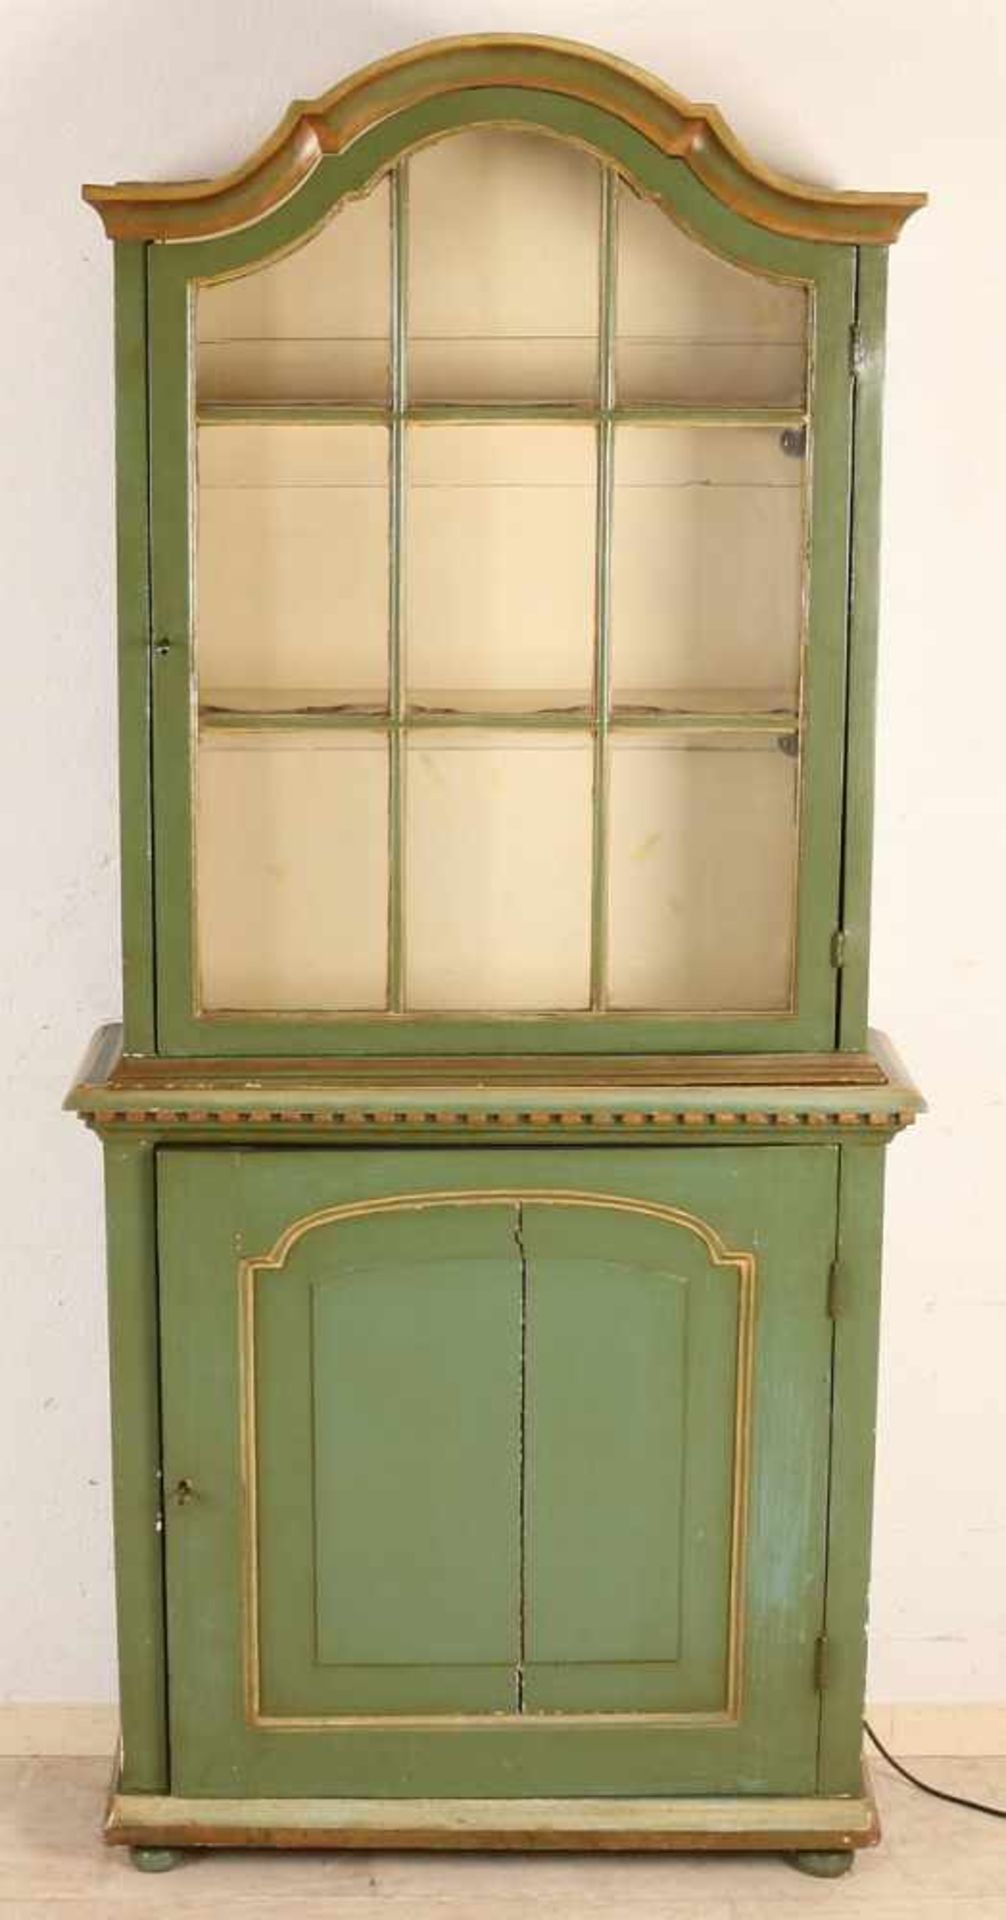 Two-part 18th - 19th century Dutch painted cabinet-cabinet design. Whitewood. Replacing locks. Size: